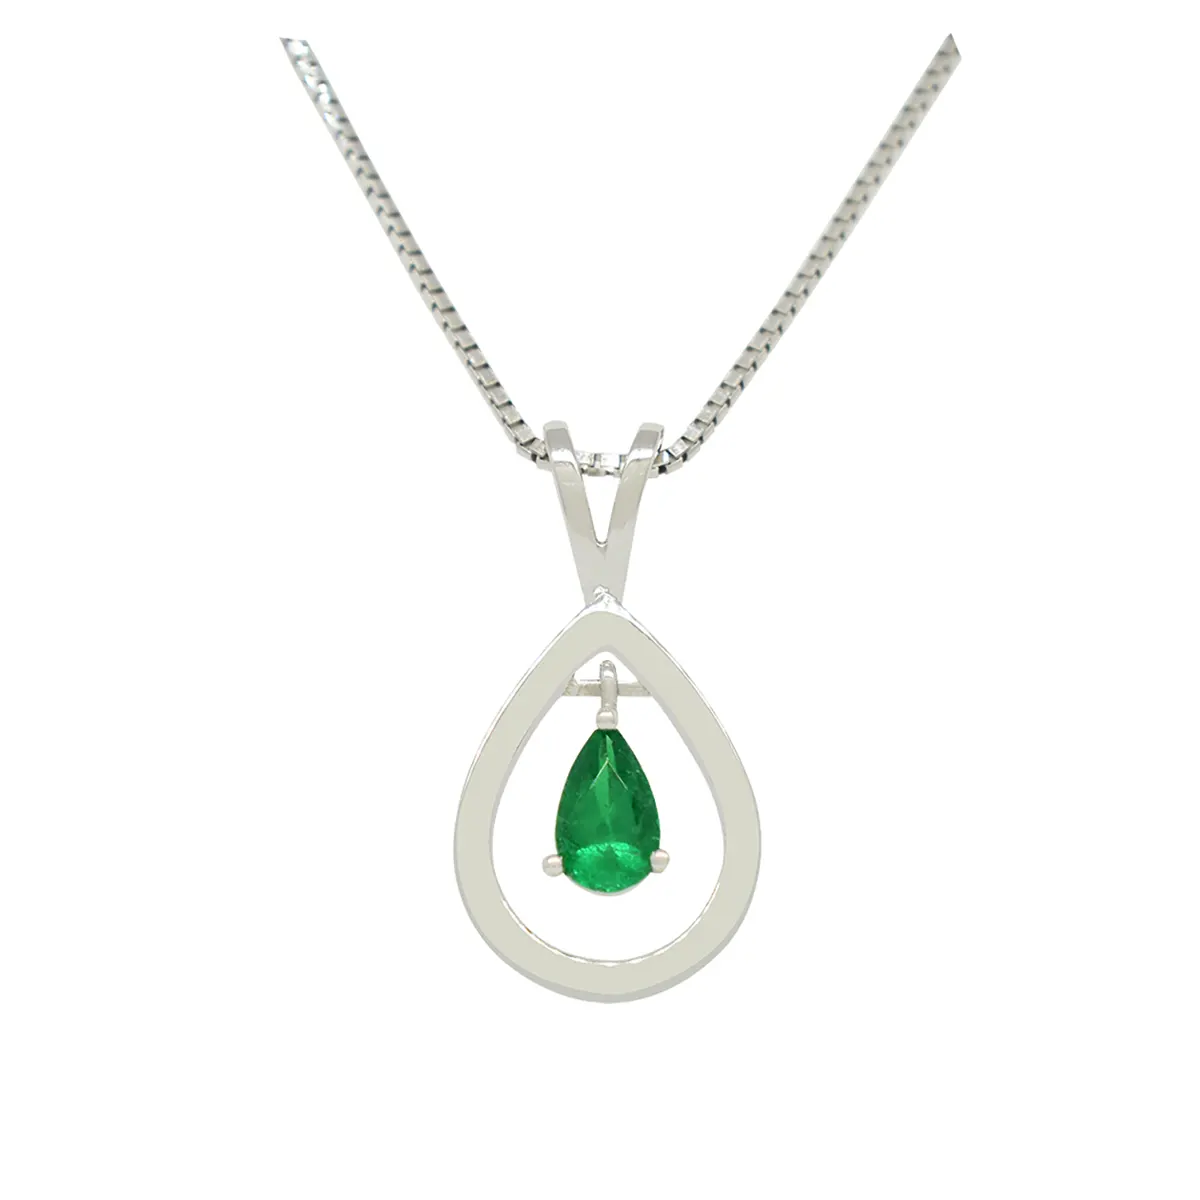 Emerald pendant custom made in18K white gold with a small 0.35 Ct. pear shape natural Colombian emerald that dangles in the middle of the piece